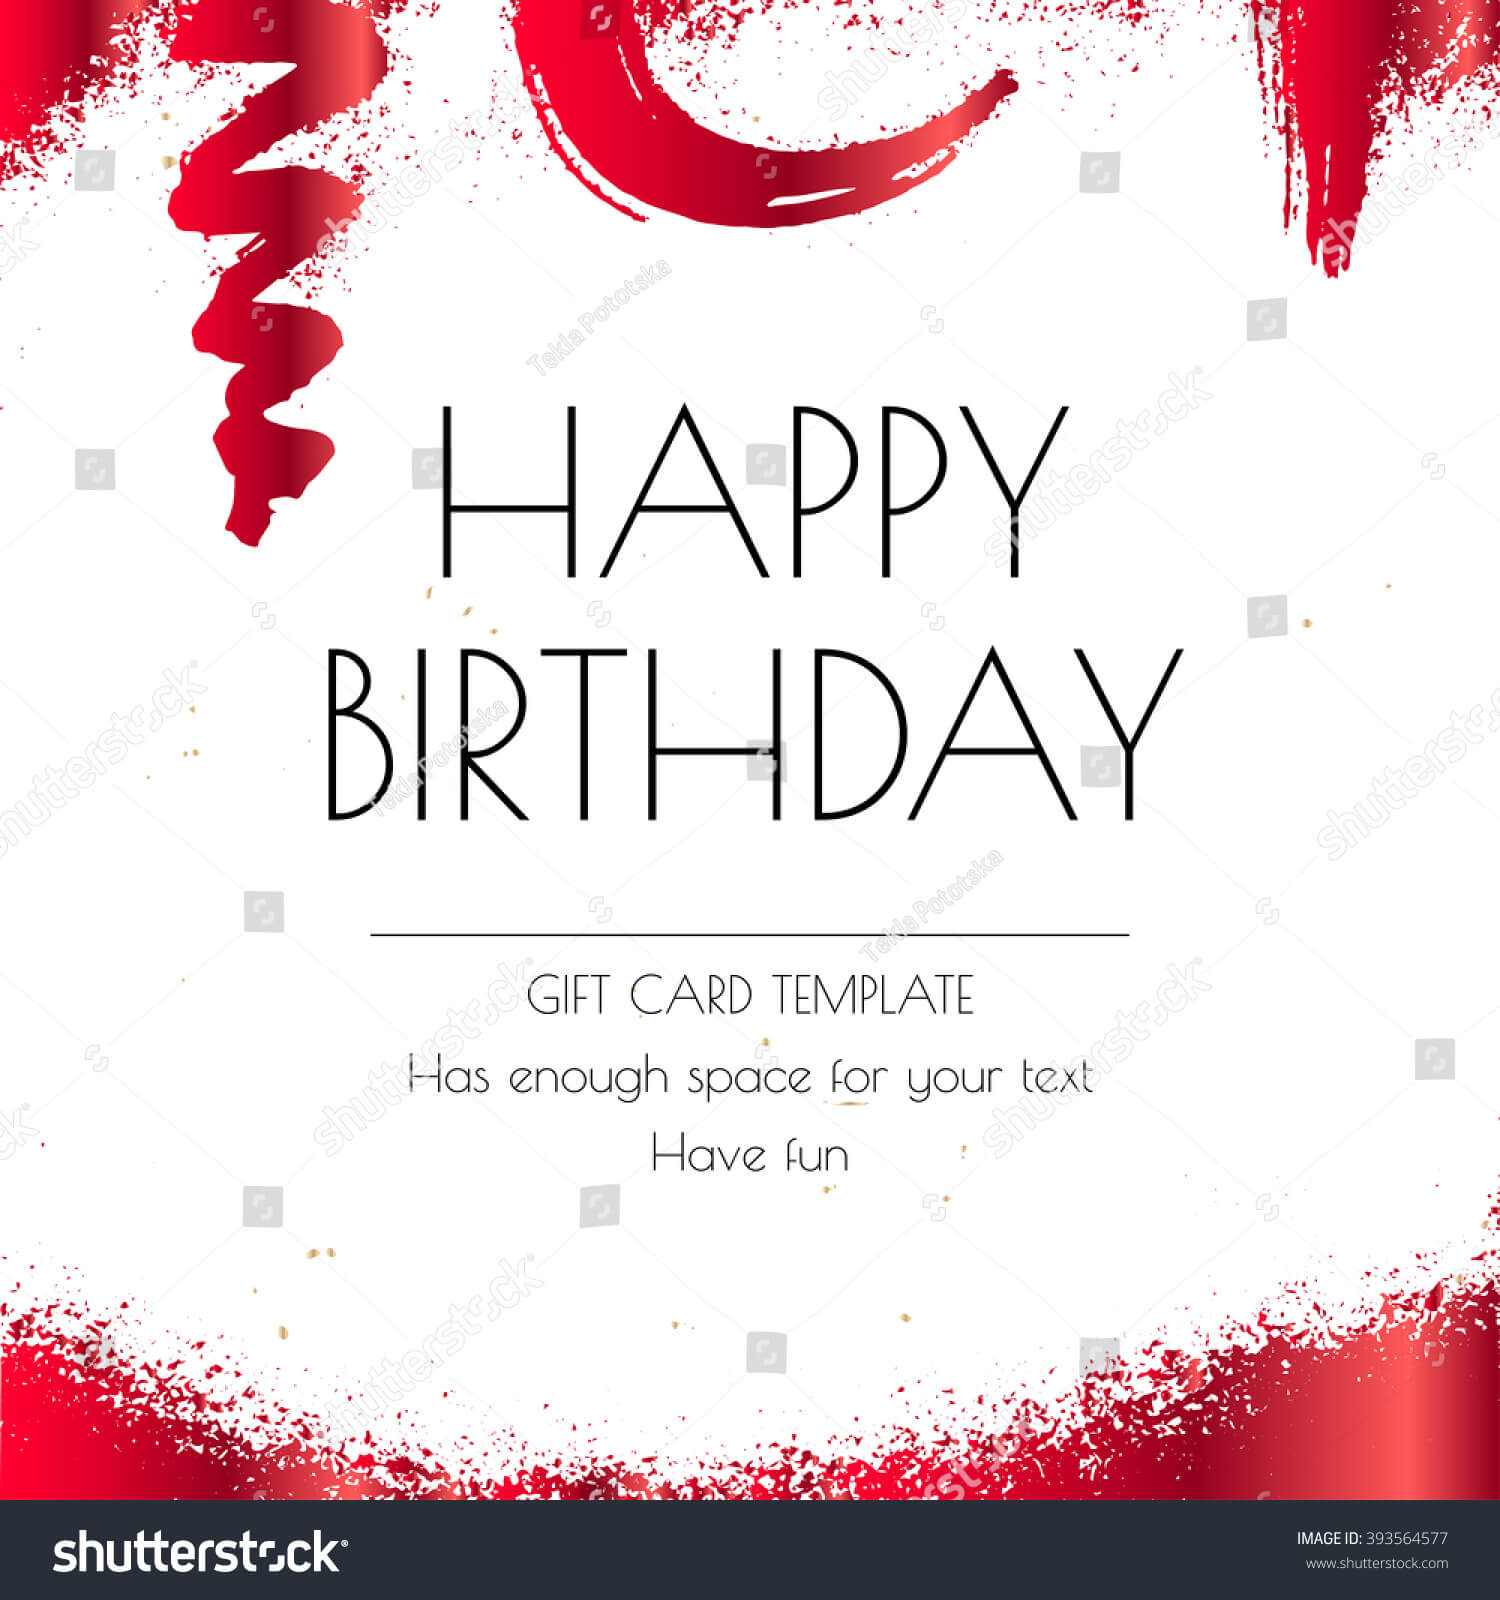 Thank You Card Indesign Template ] – Weekly Calendar Inside Birthday Card Indesign Template